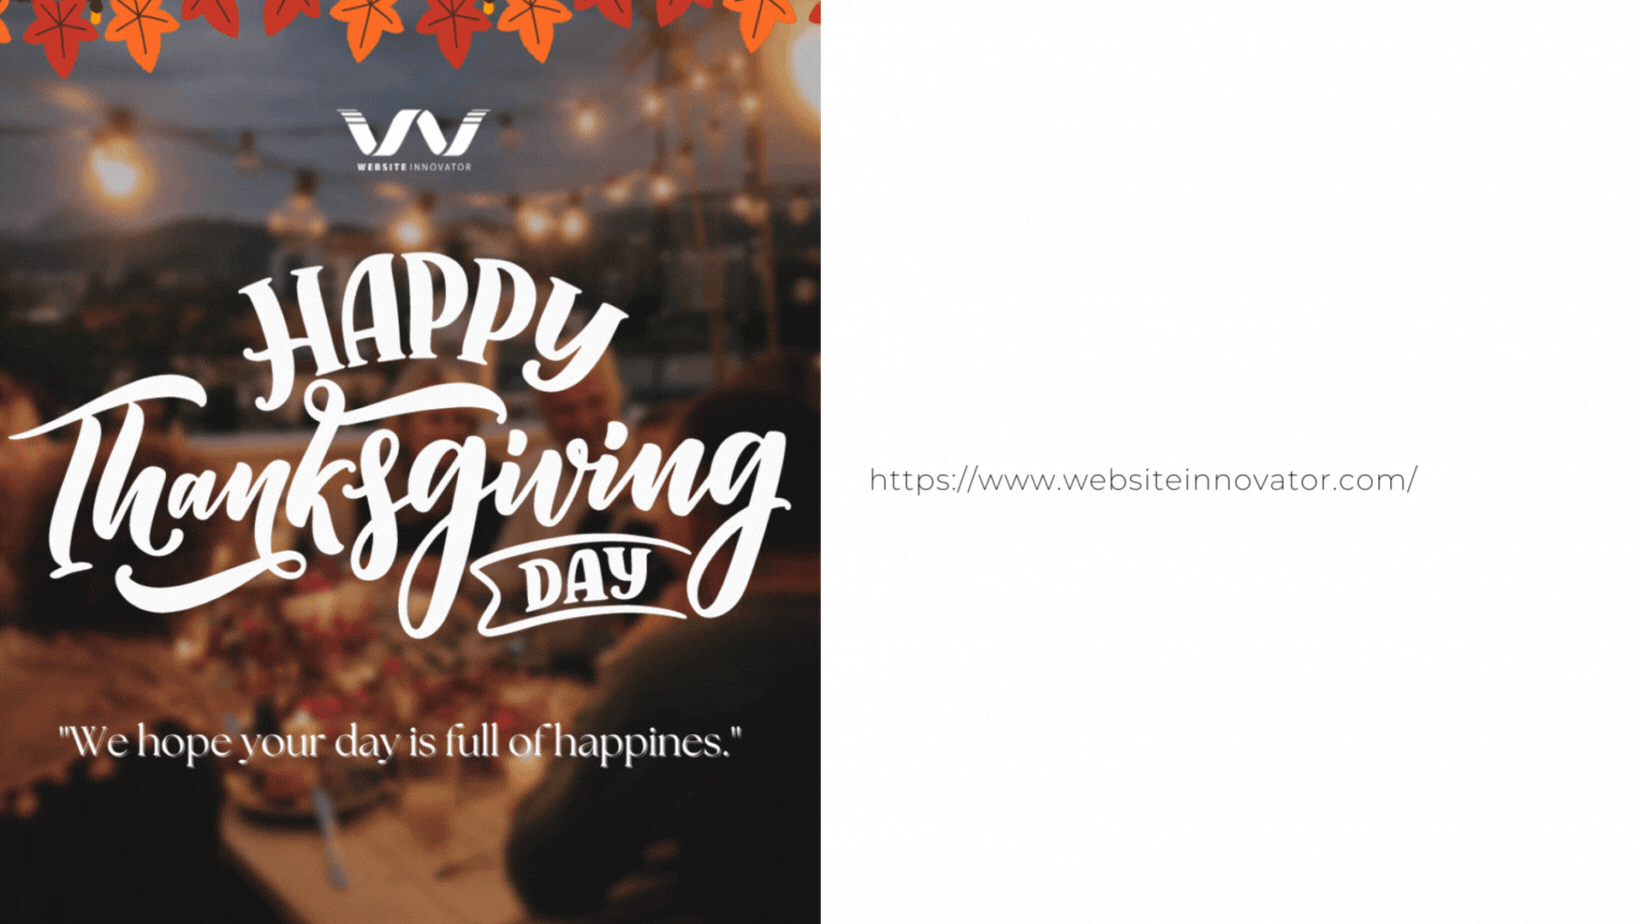 Gratitude in Action: Celebrating Thanksgiving with Website Innovator